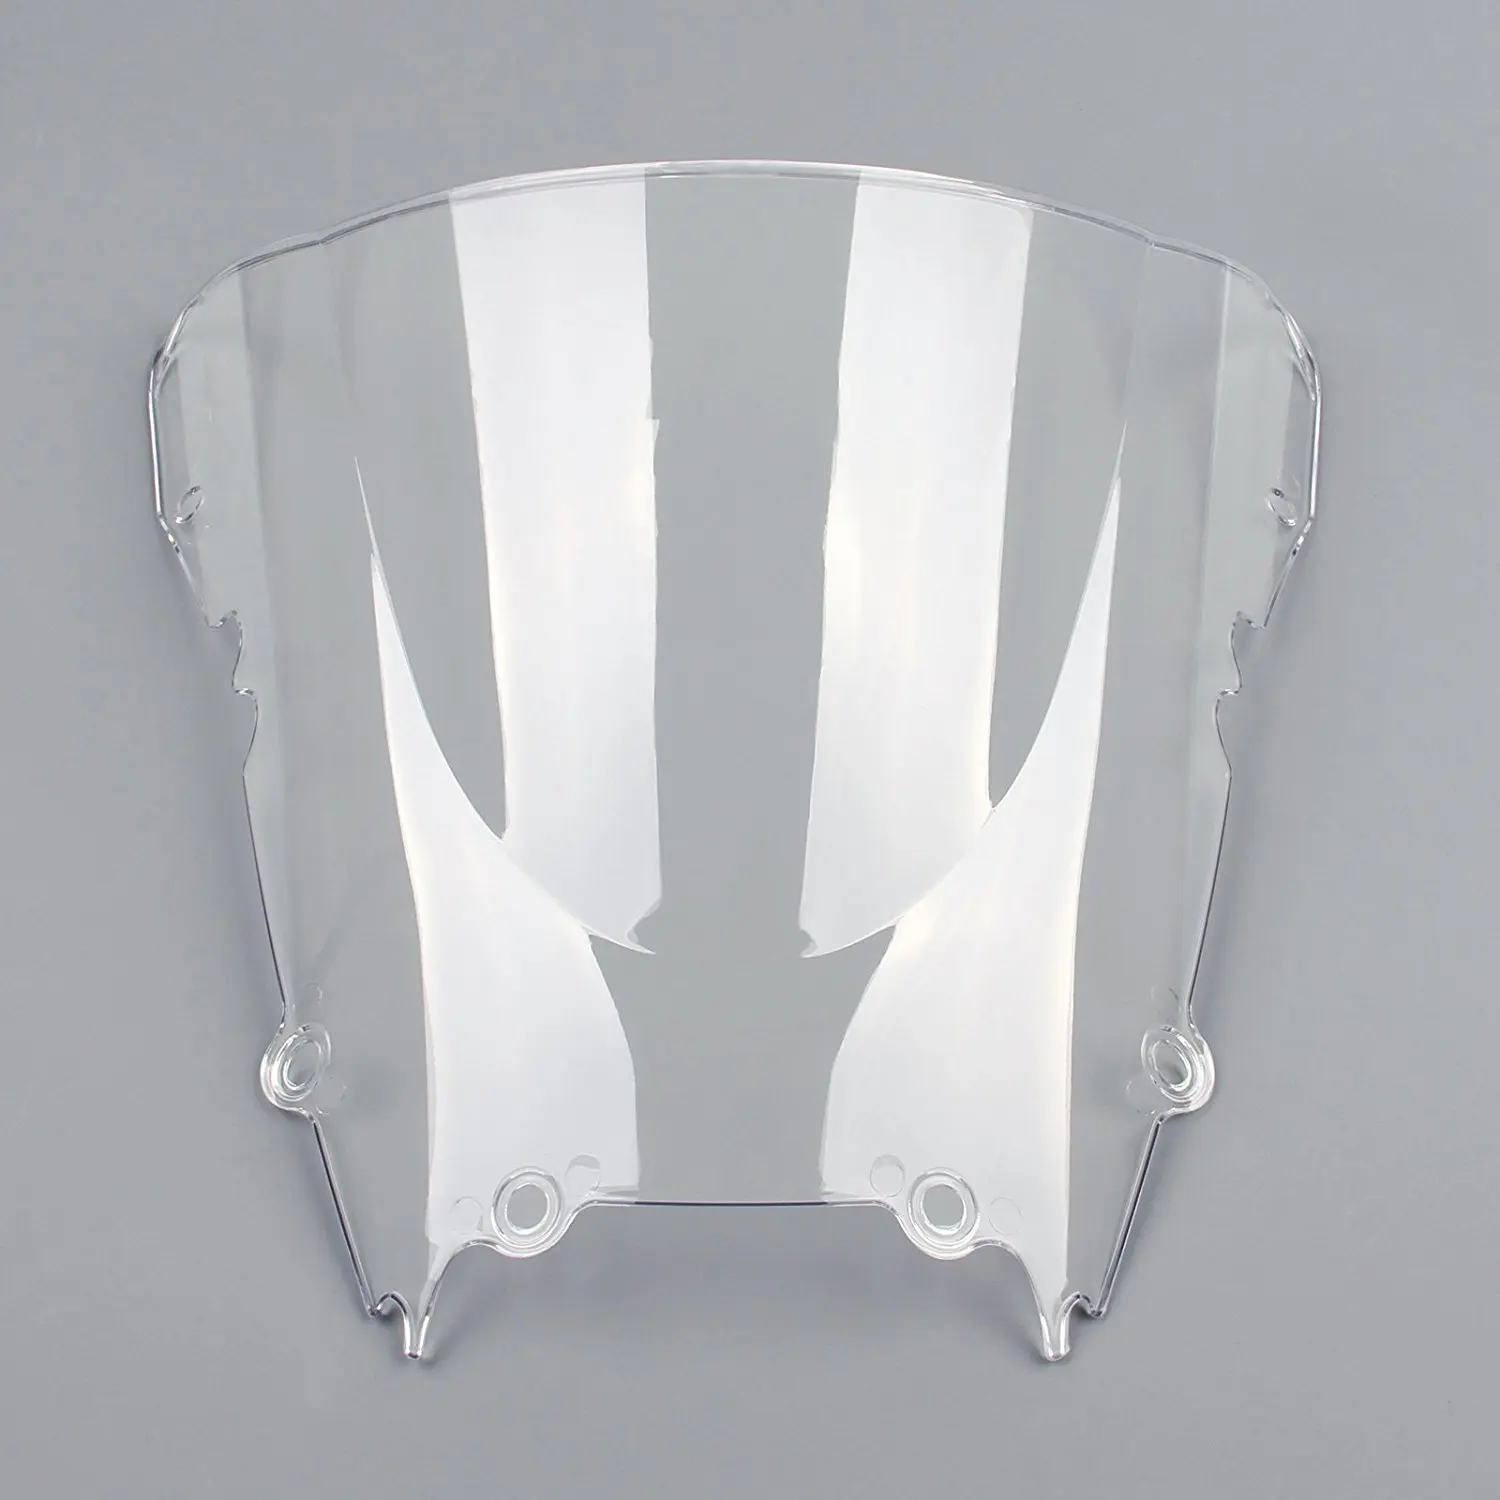 Motorcycle Clear Double Bubble Windscreen Windshield Screen ABS Shield Fit For Yamaha YZF R6 YZF-R6 1998-2002